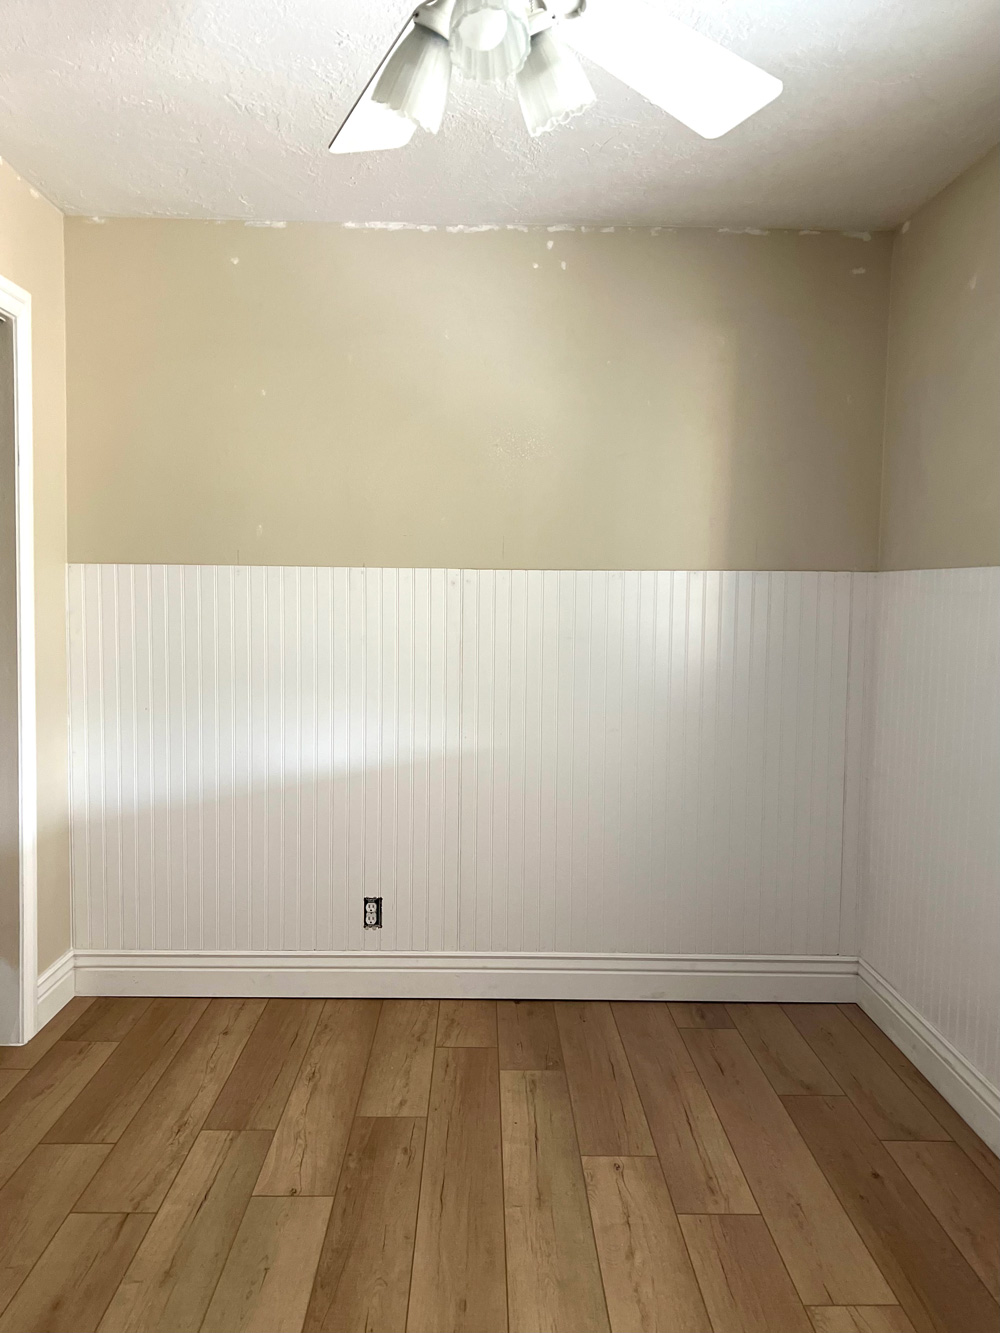 A beige room with white beadboard and ceiling fan.